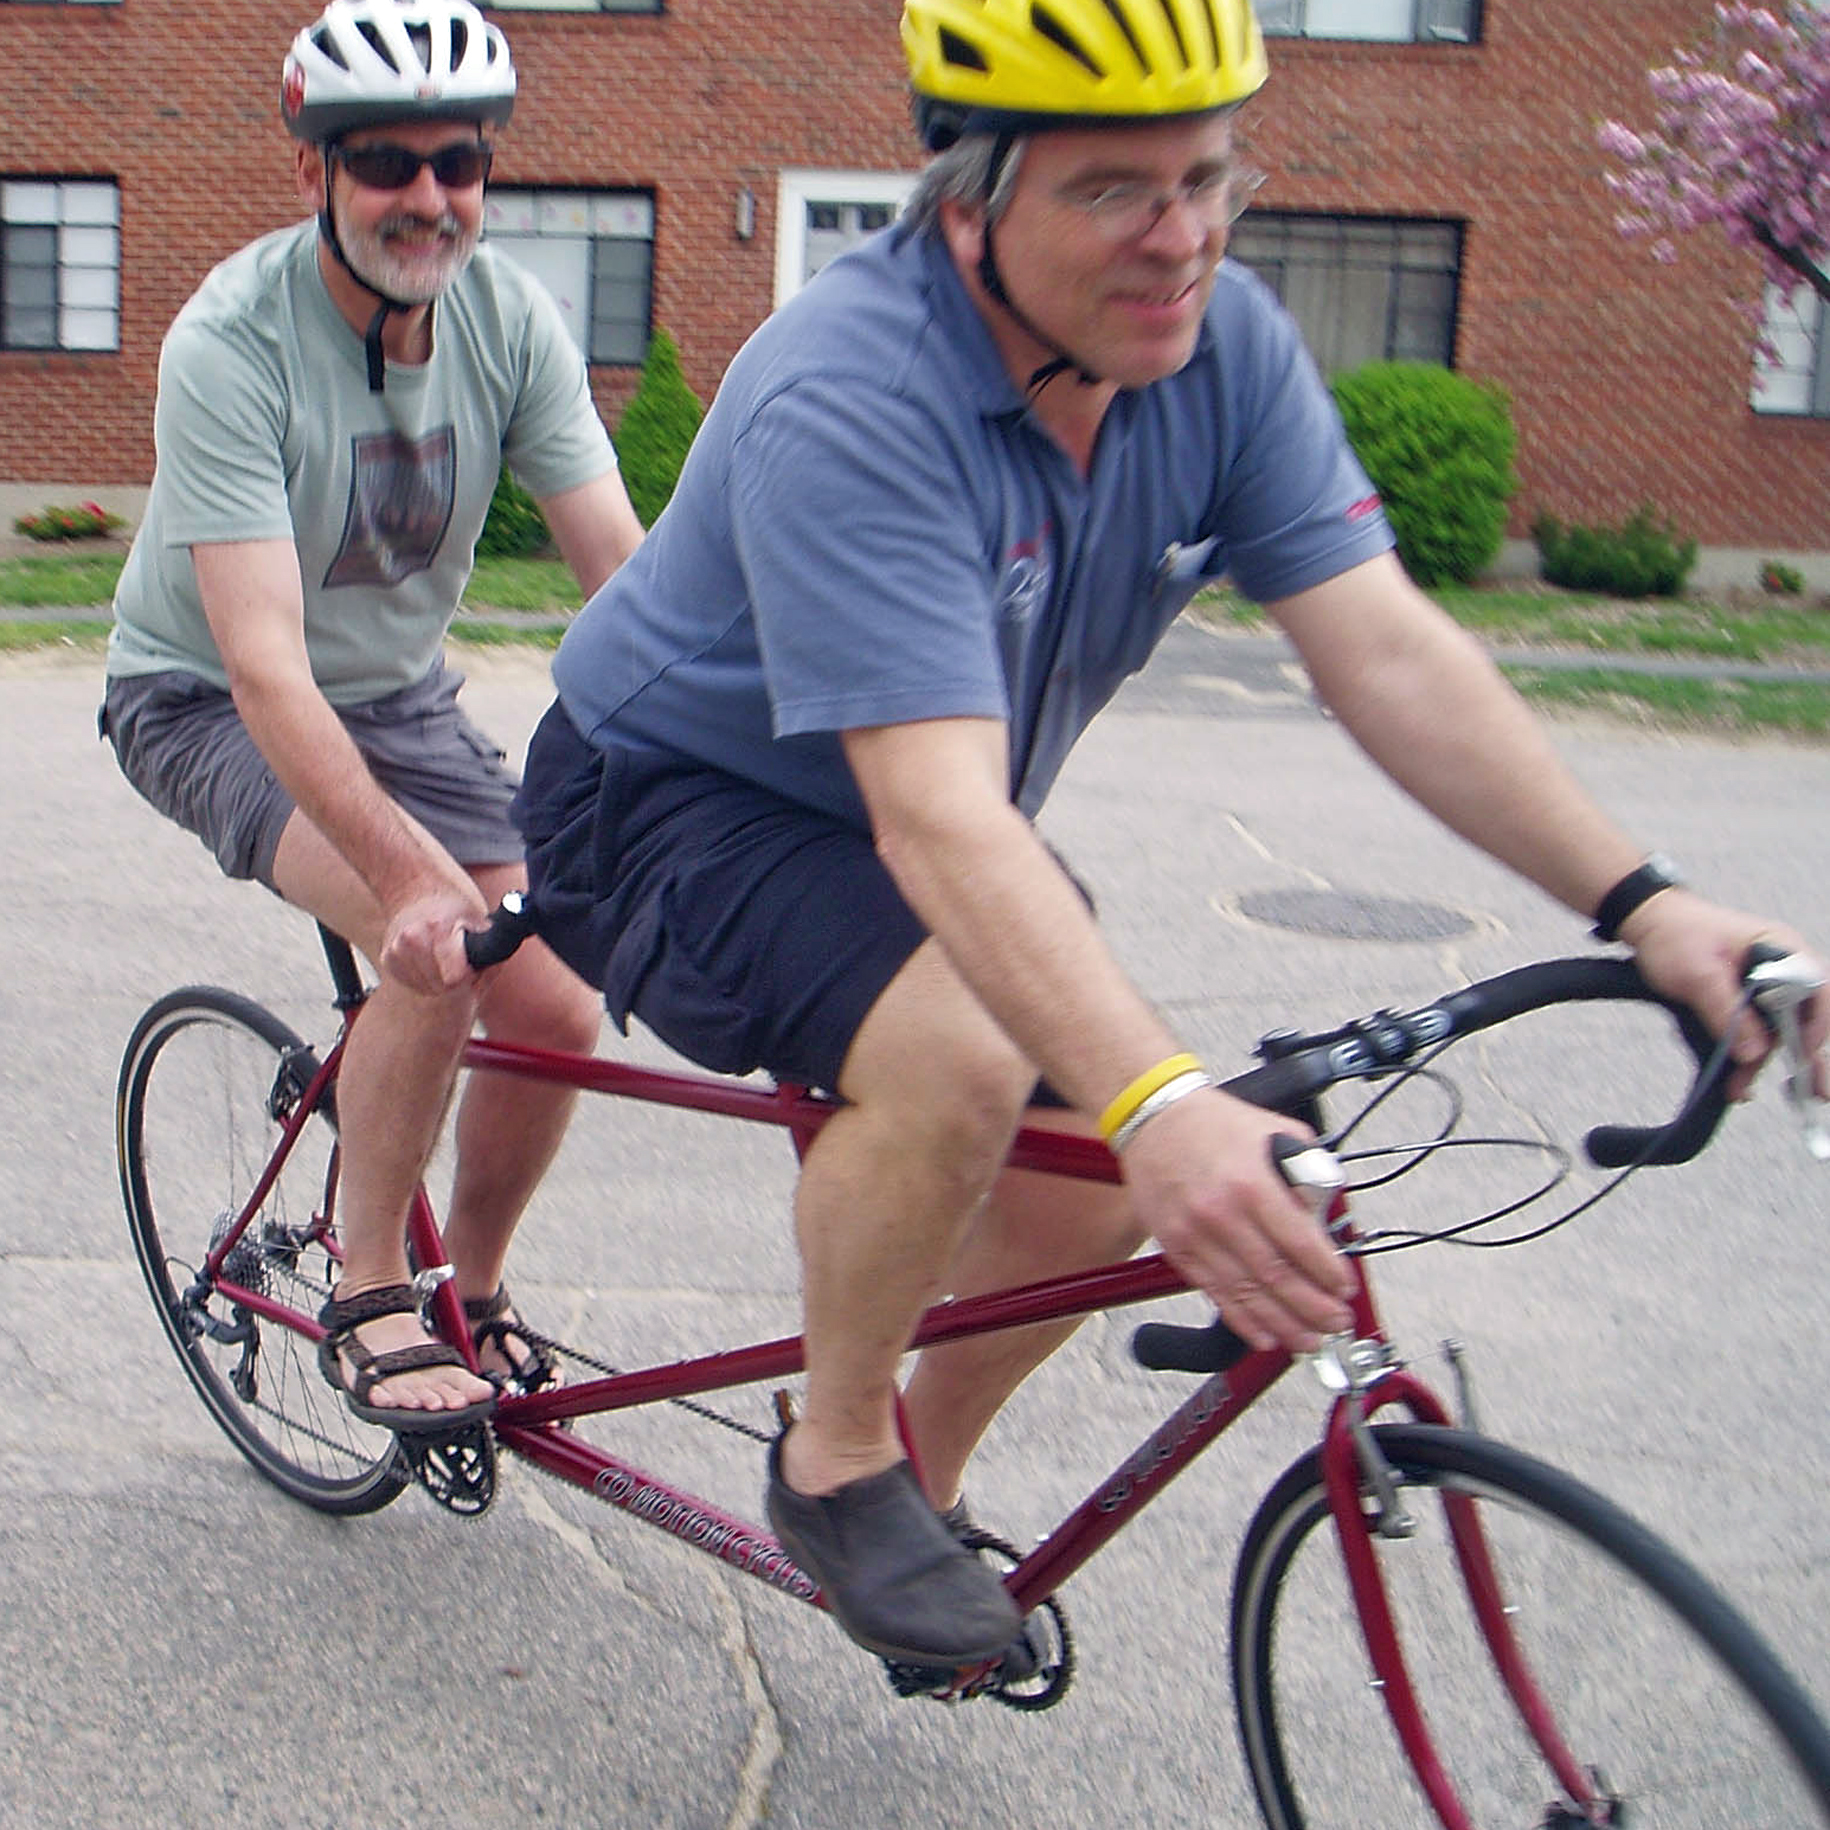 how to ride a tandem bike